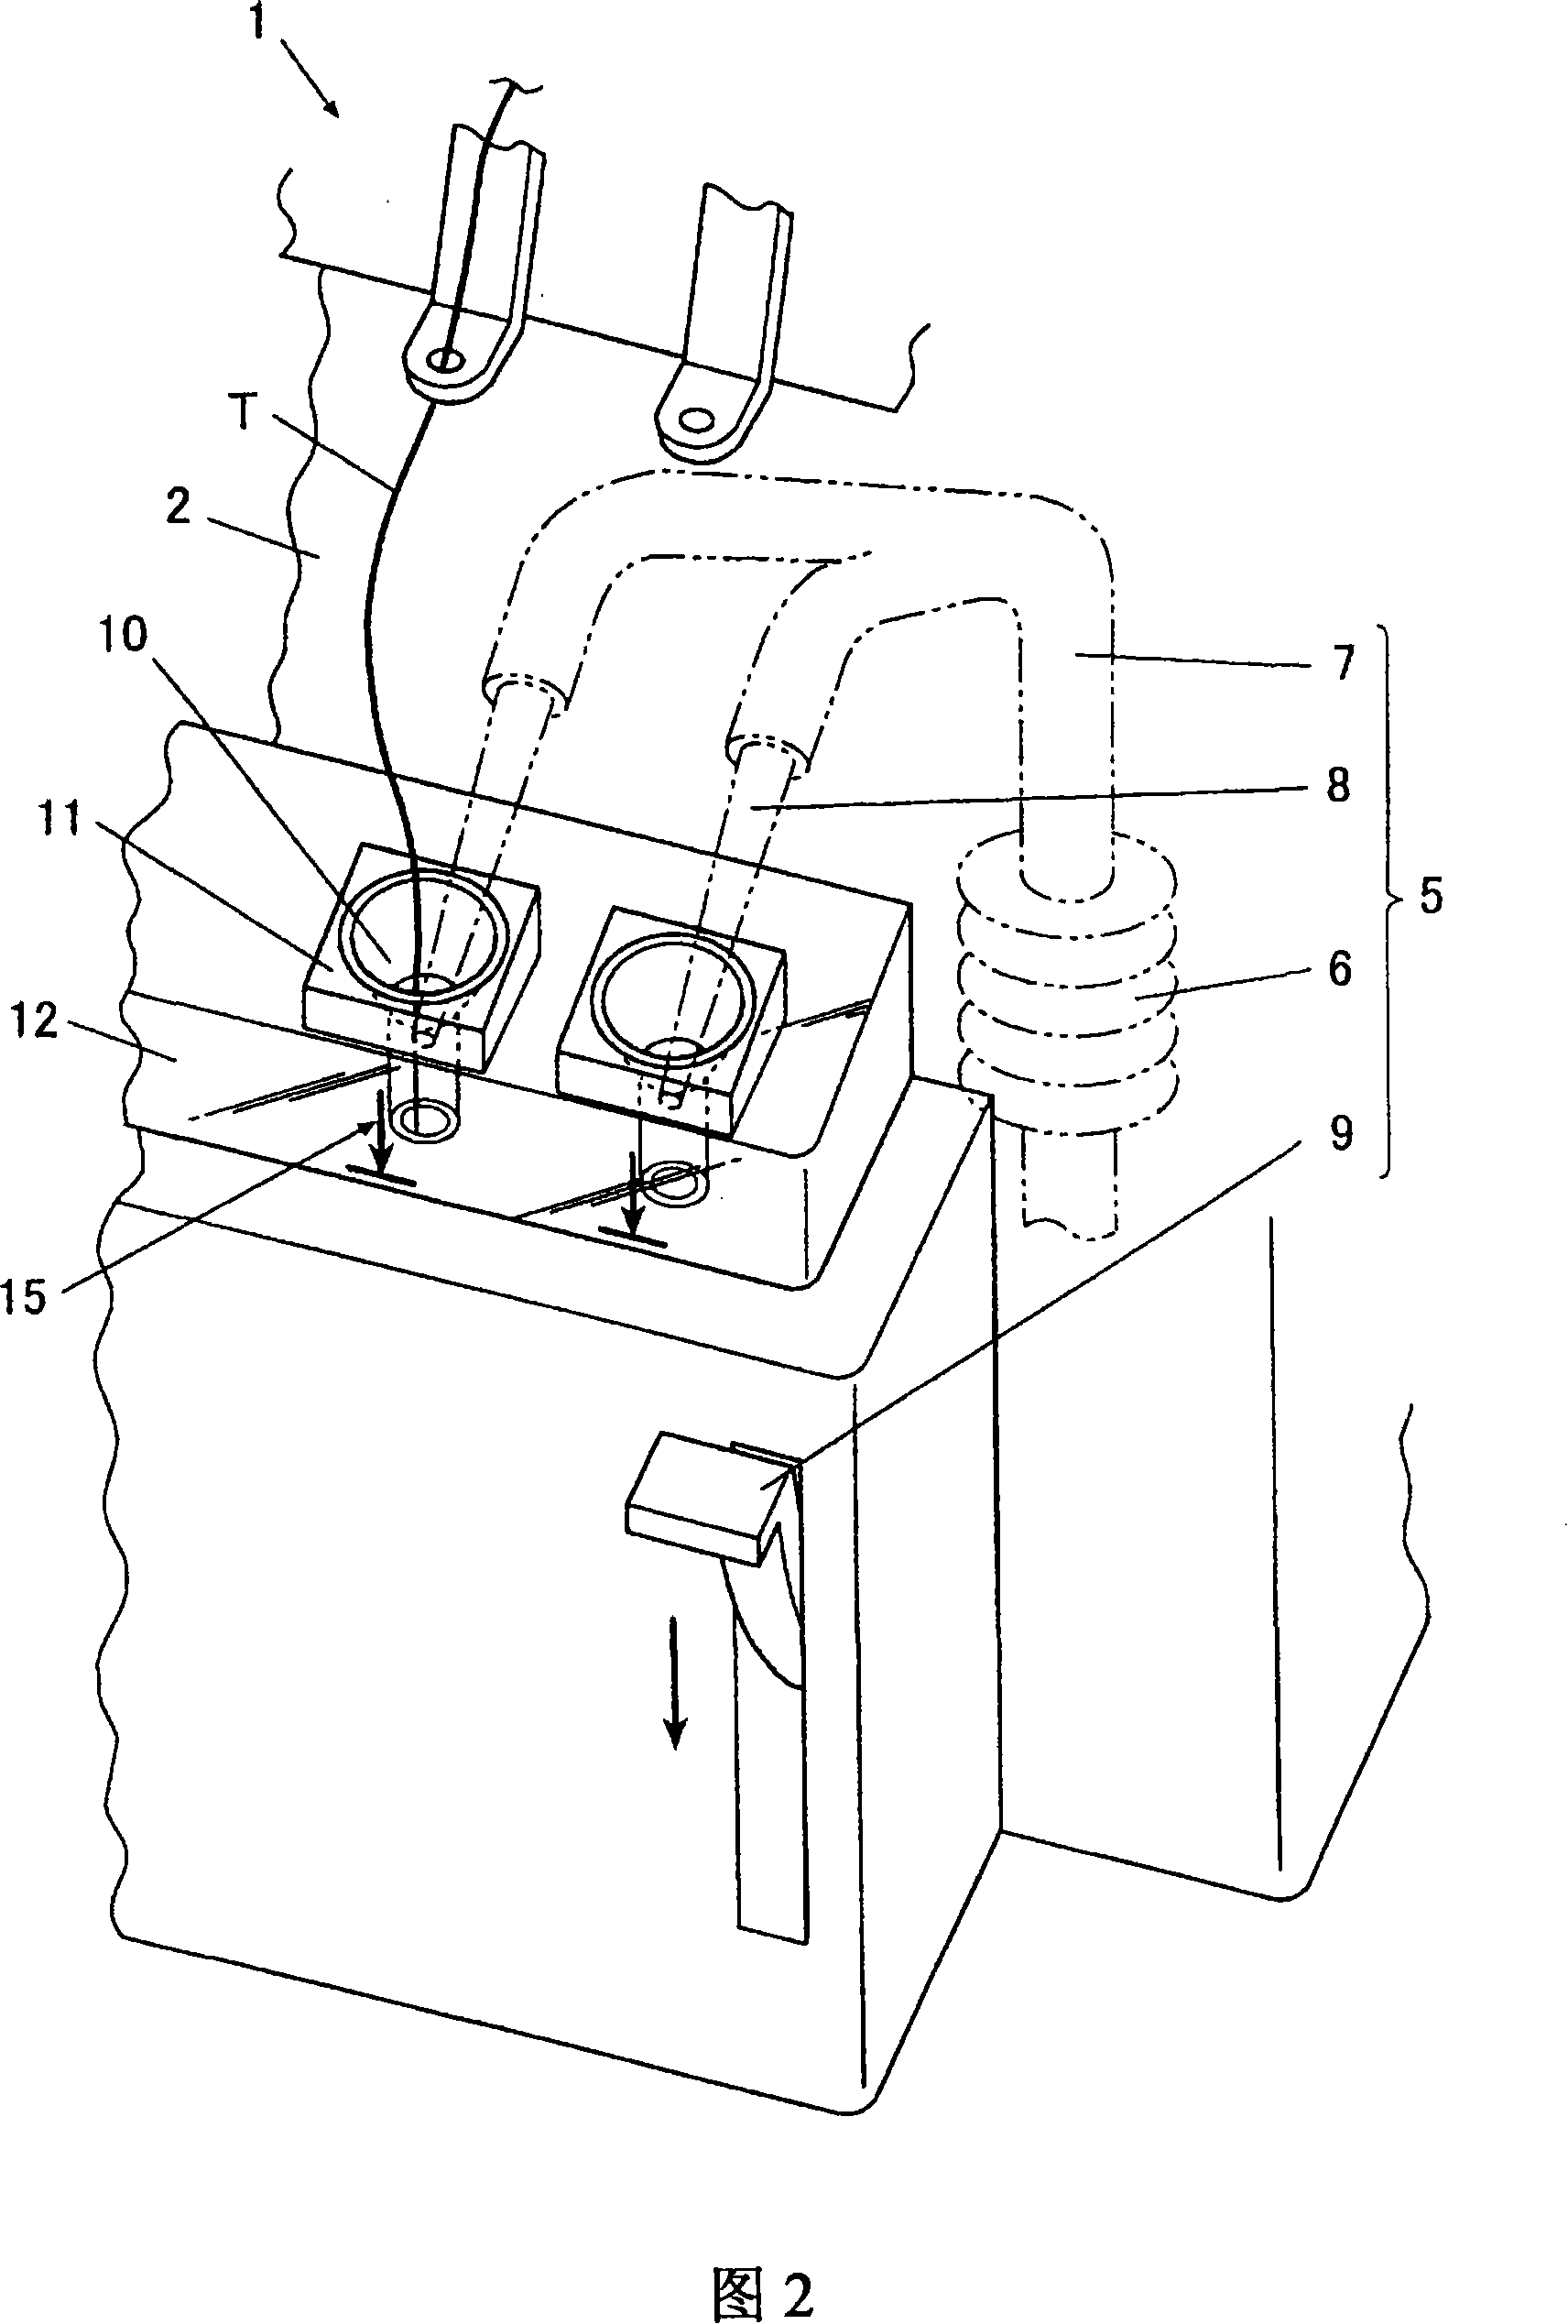 Thread-through device for sewing machine